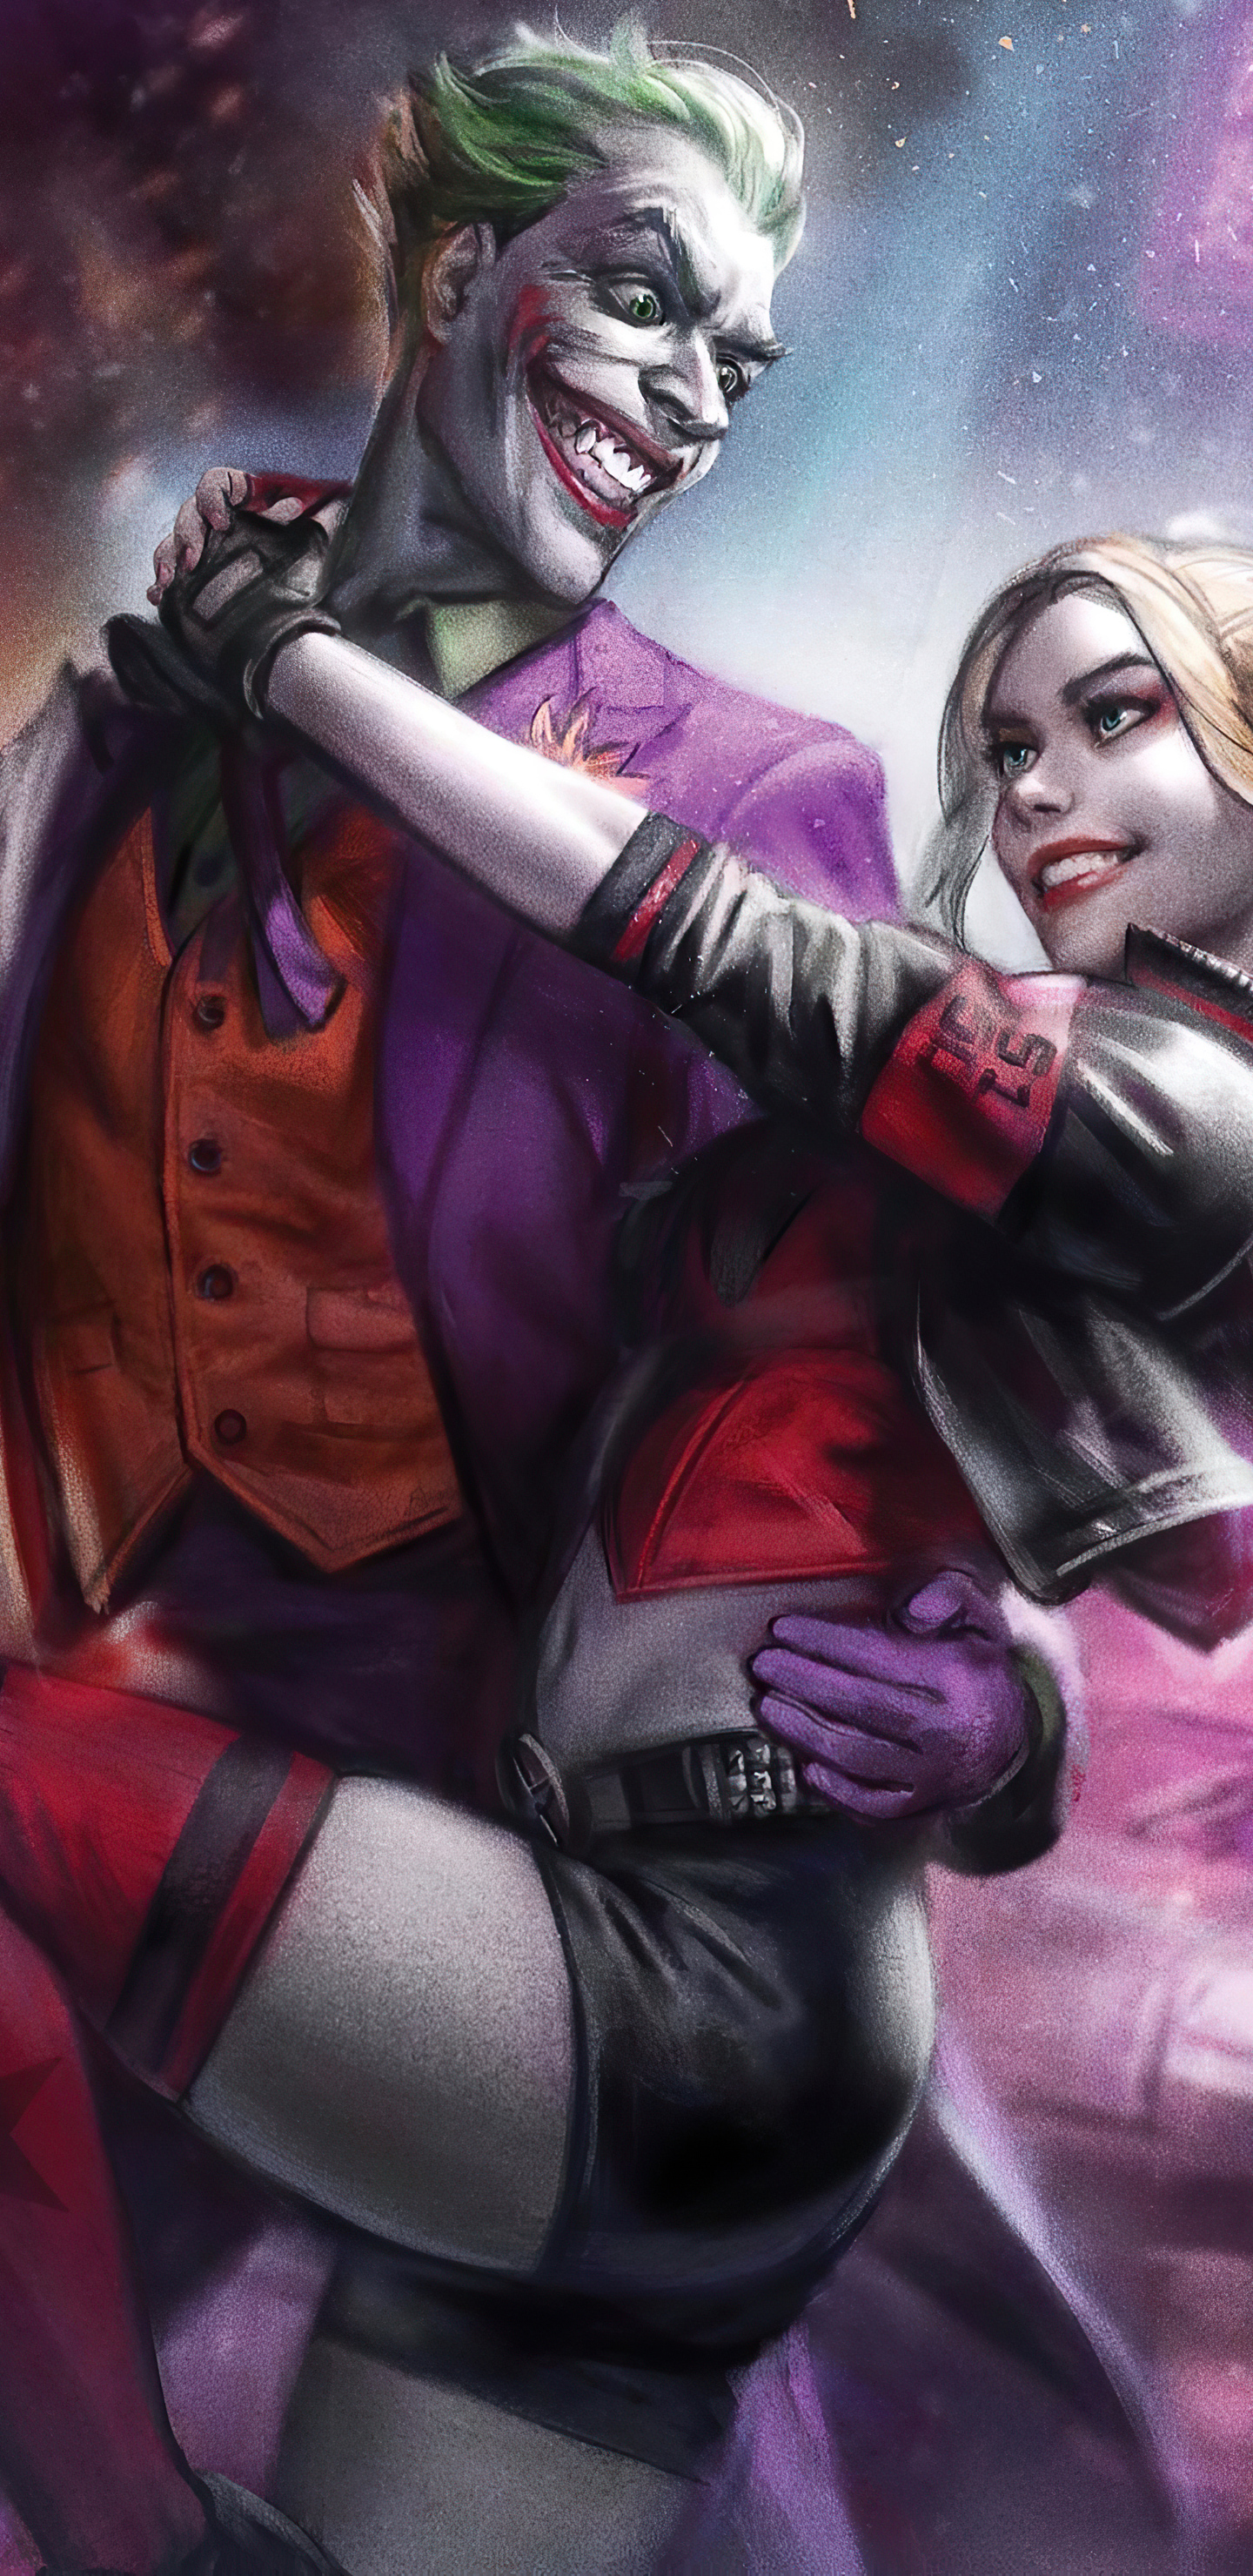 1440x2960 Joker And Harley Quinn 4k 2020 Samsung Galaxy Note 9,8, S9,S8,S8+  QHD HD 4k Wallpapers, Images, Backgrounds, Photos and Pictures